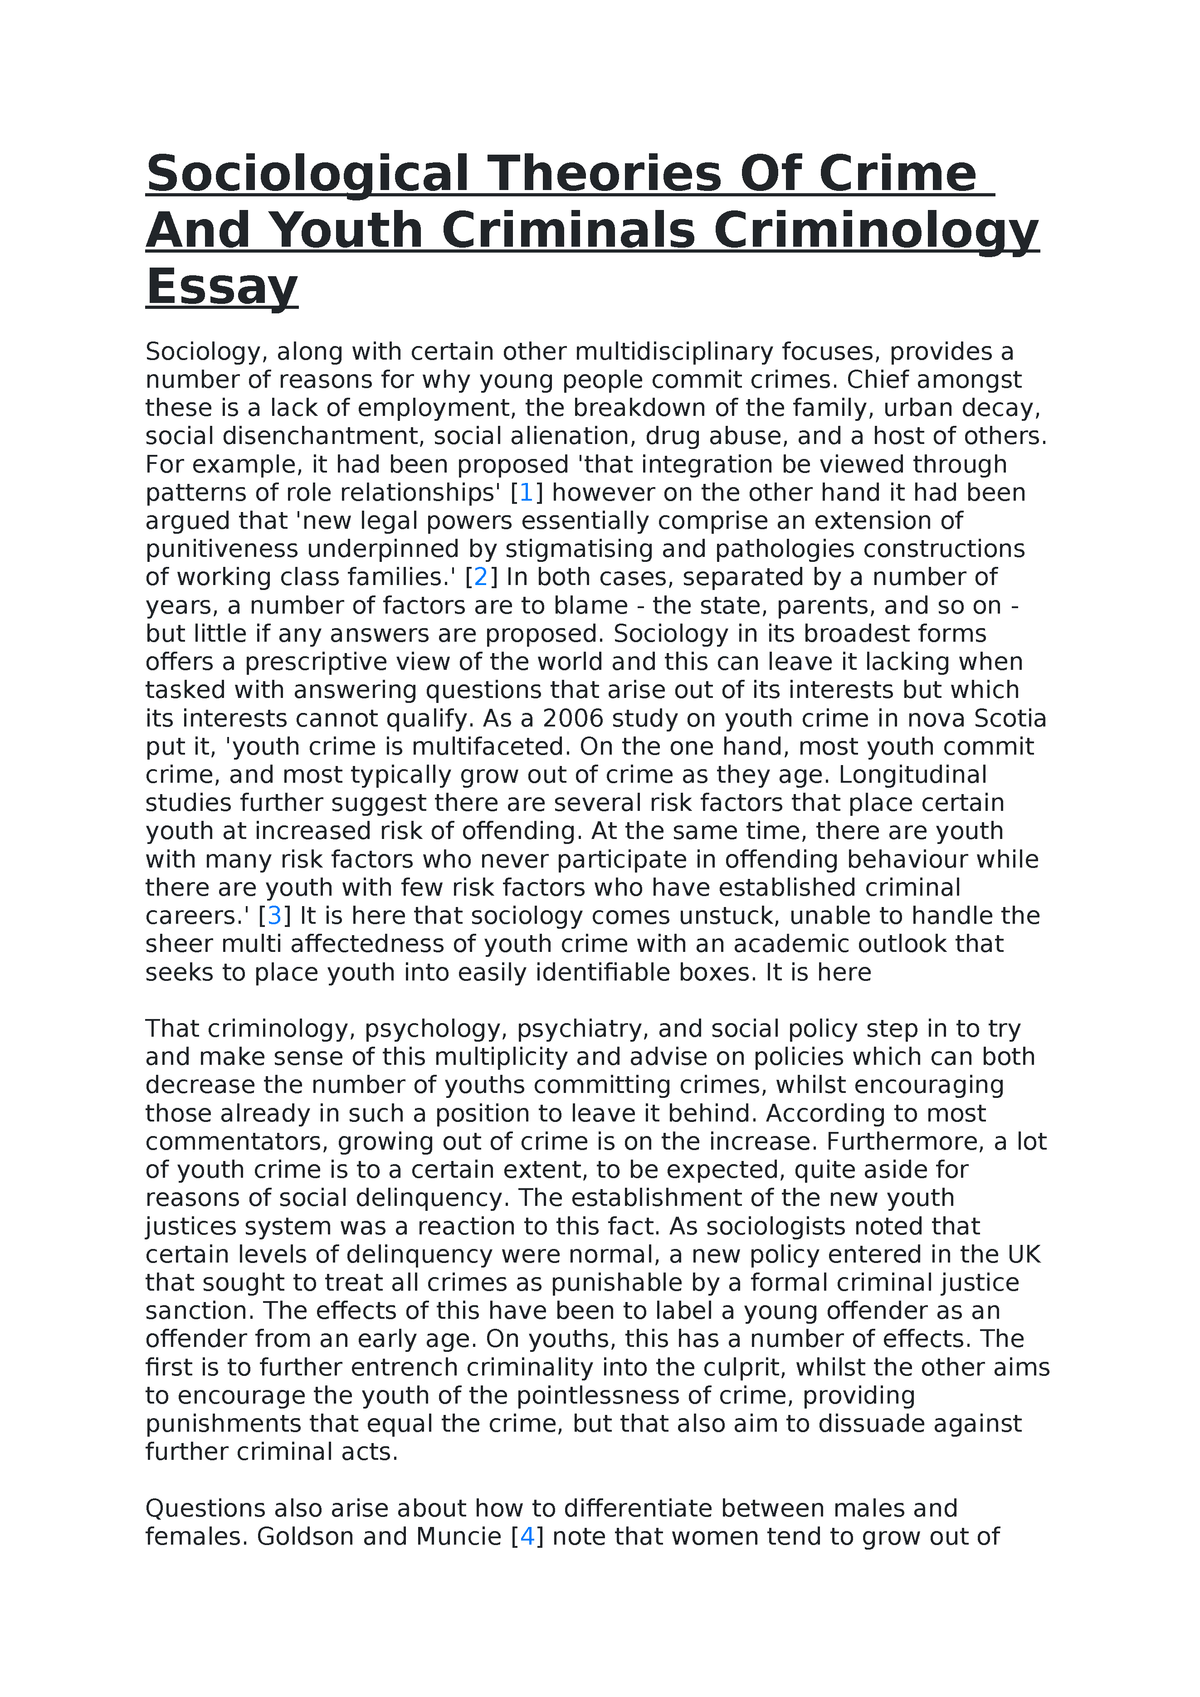 Cross And Fhagen-Smiths Theory Essay